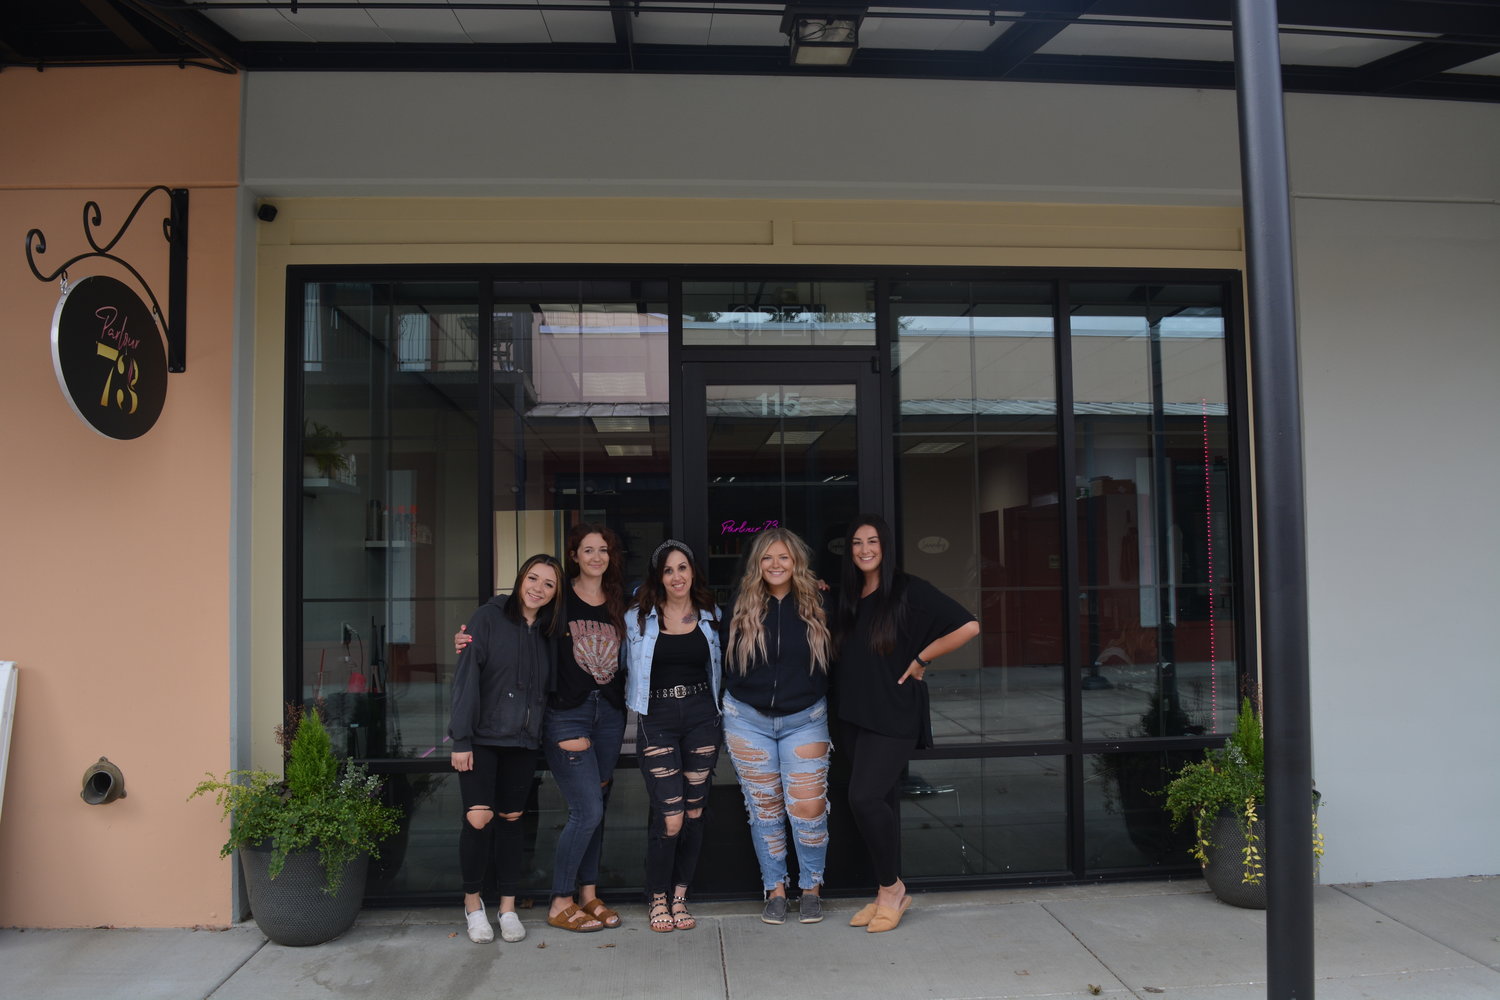 Battle Ground beauty salon was recognized in Best of Clark County